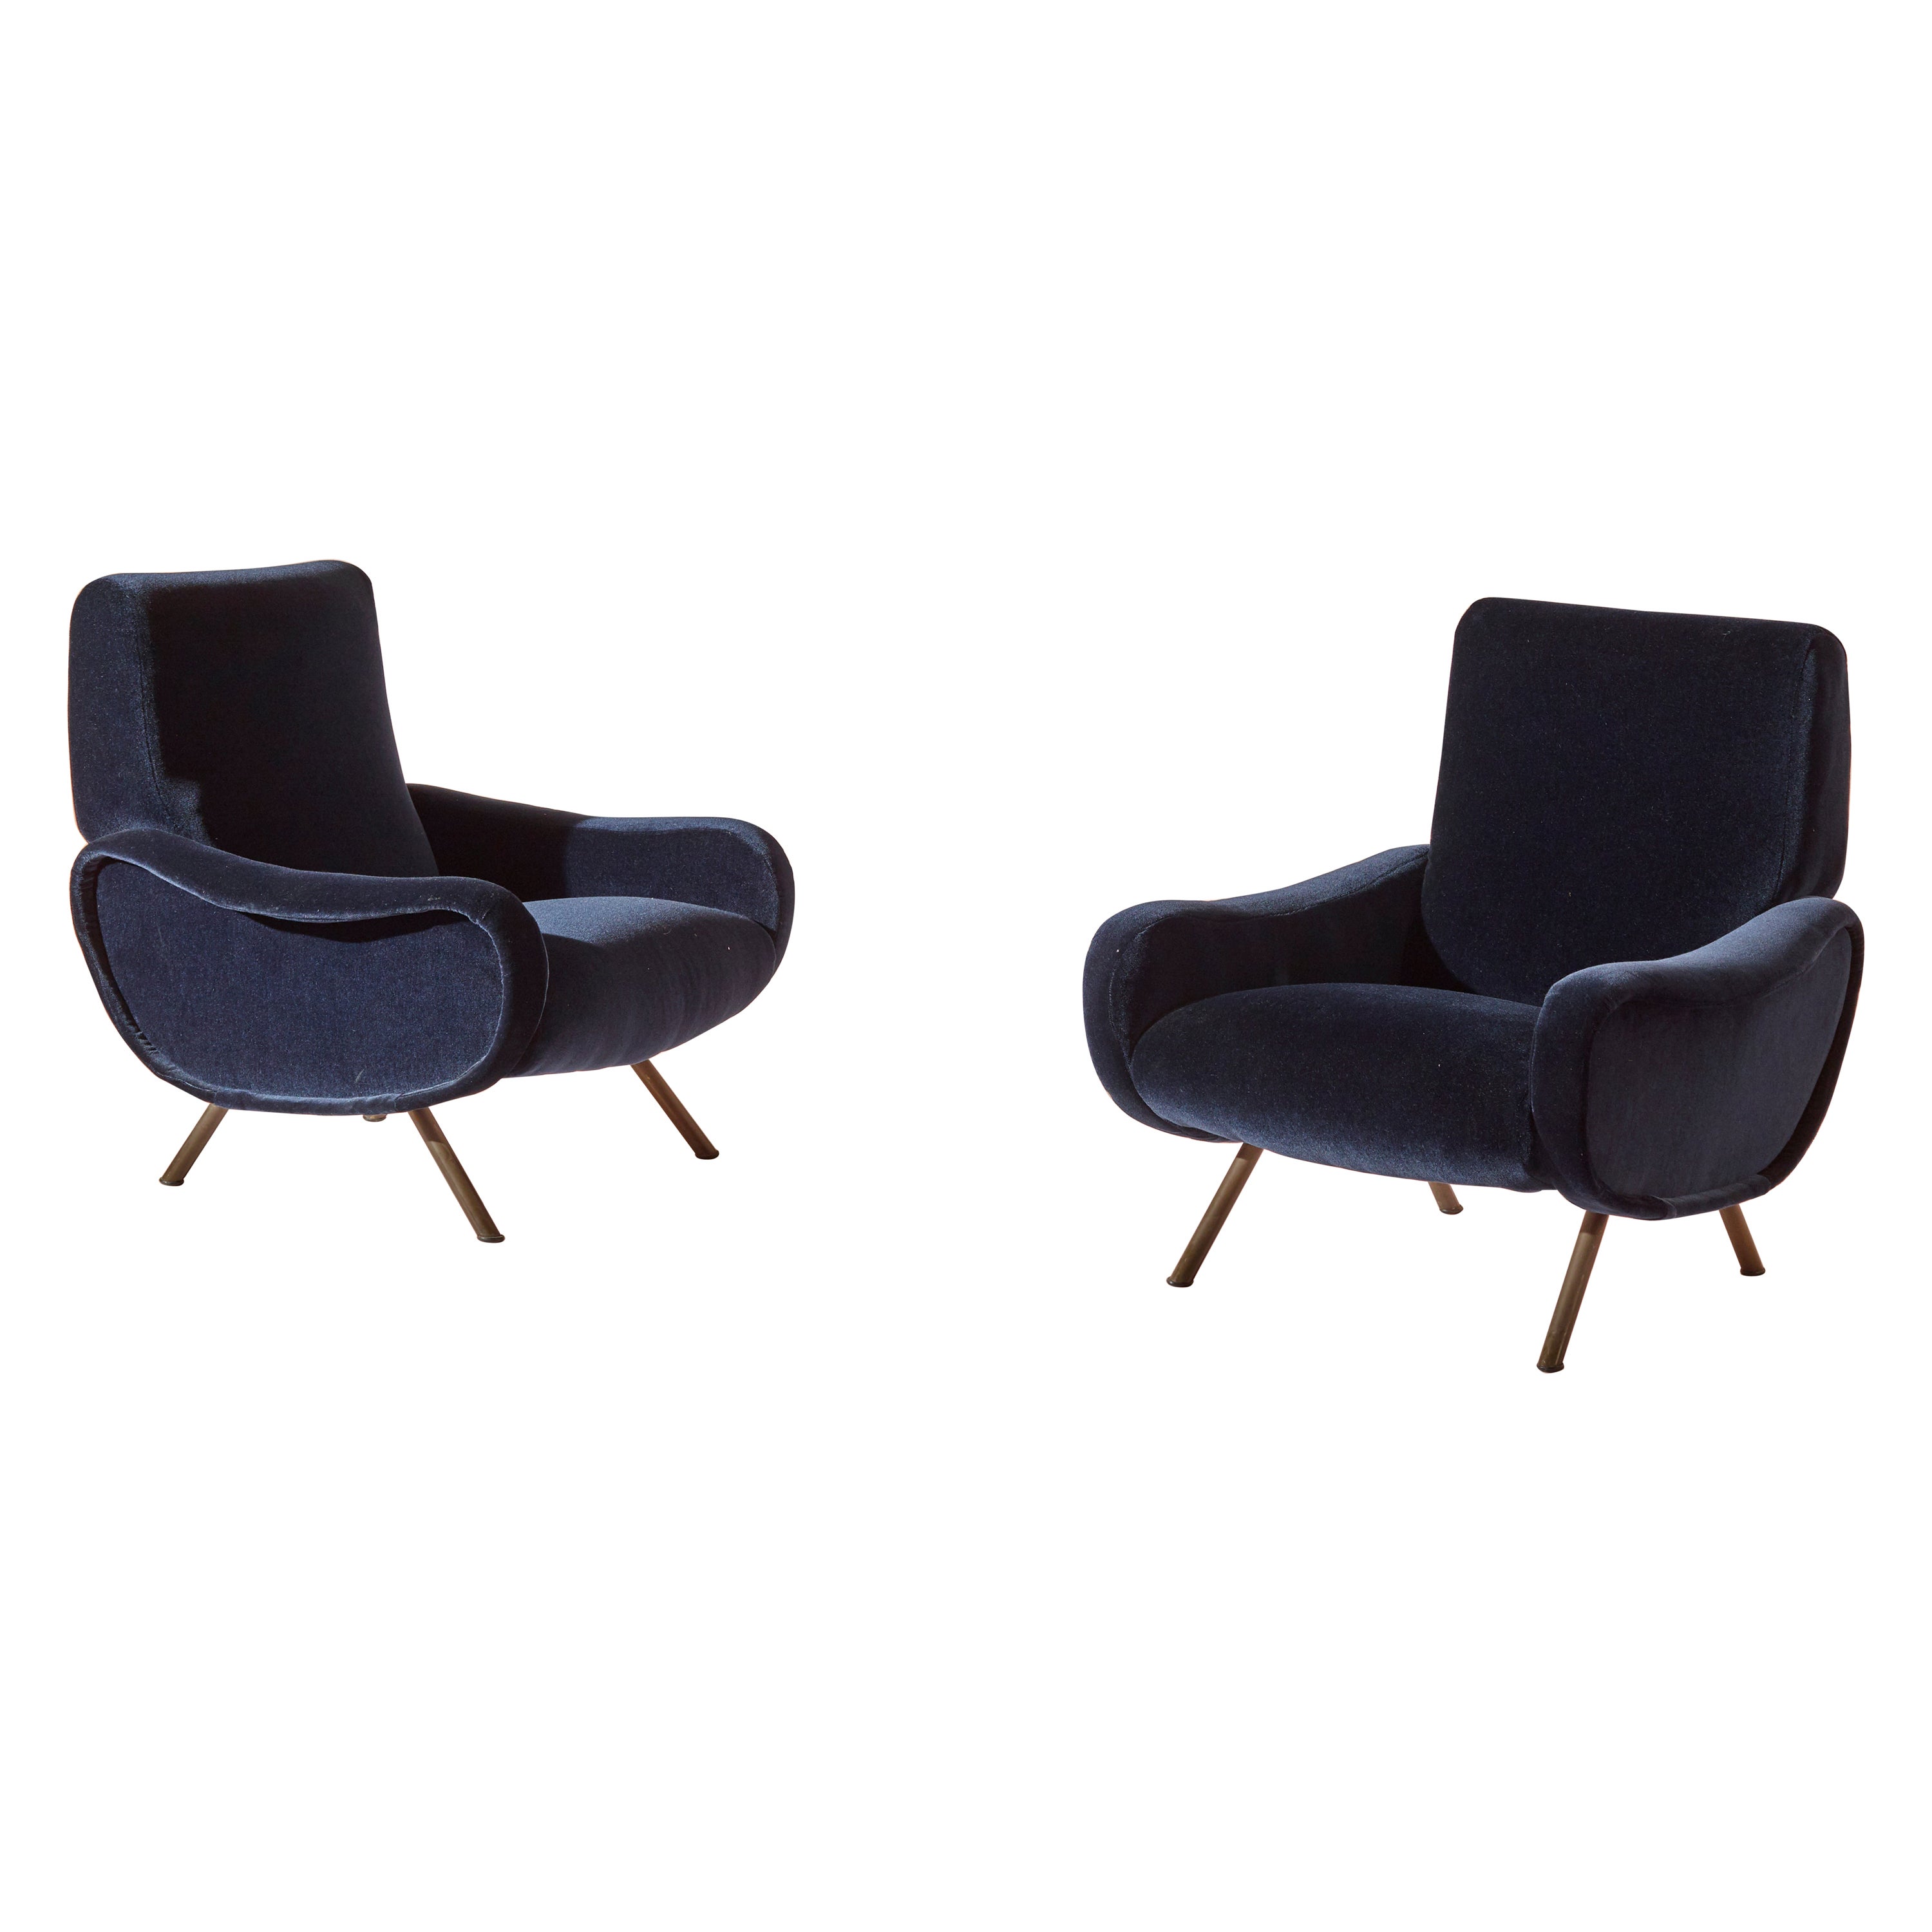 Marco Zanuso for Arflex, Italy, Pair of ''Lady'' Armchairs in Blue Cotton Velvet